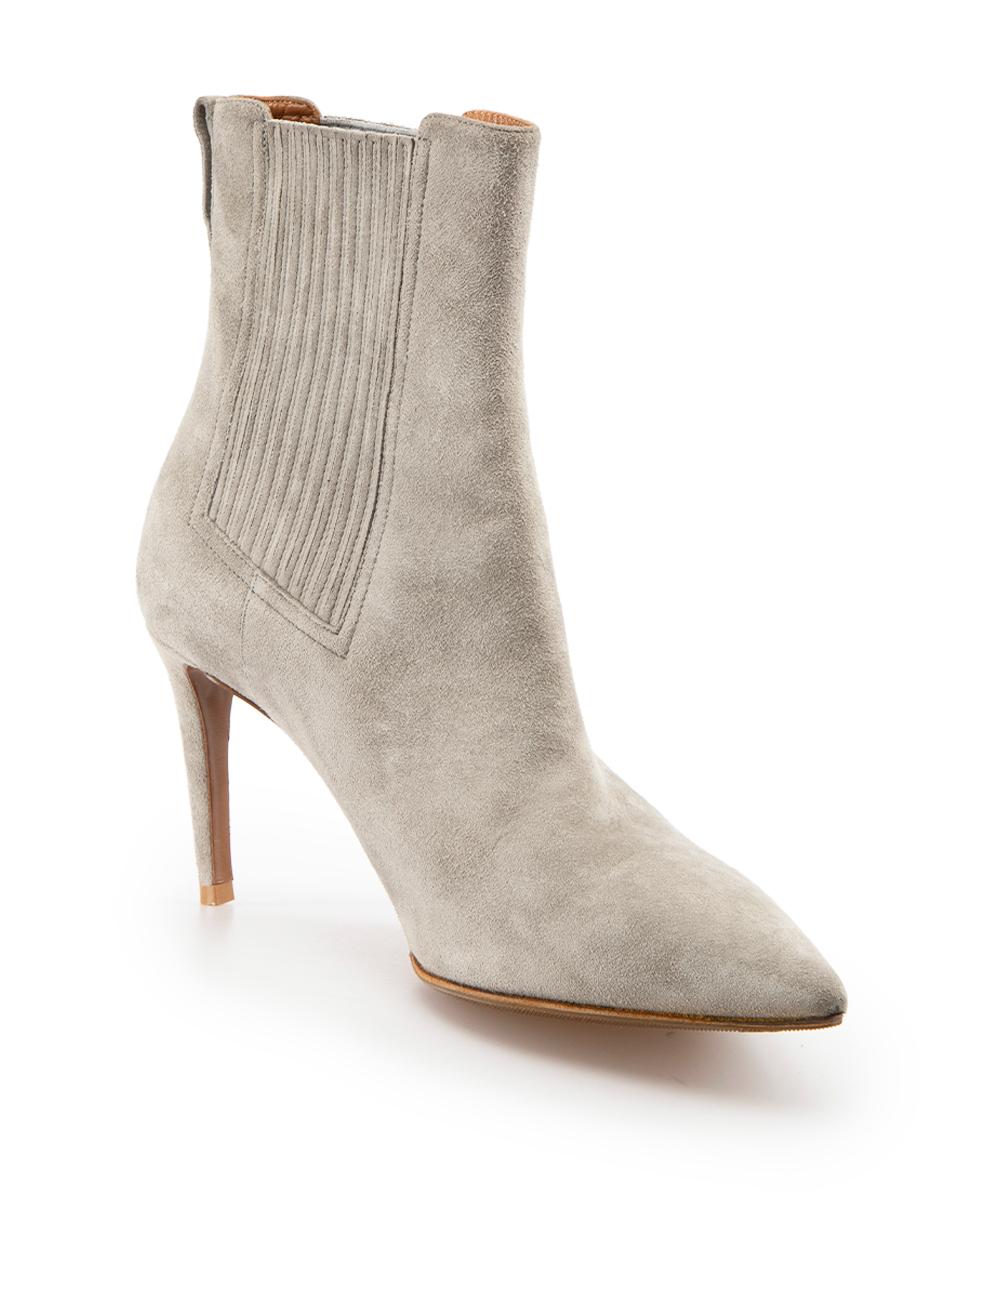 CONDITION is Very good. Minimal wear to boots is evident. Minimal wear to both boot toes and heels with indents and marks to the suede on this used Ralph Lauren designer resale item. Please note that this item has been resoled.
